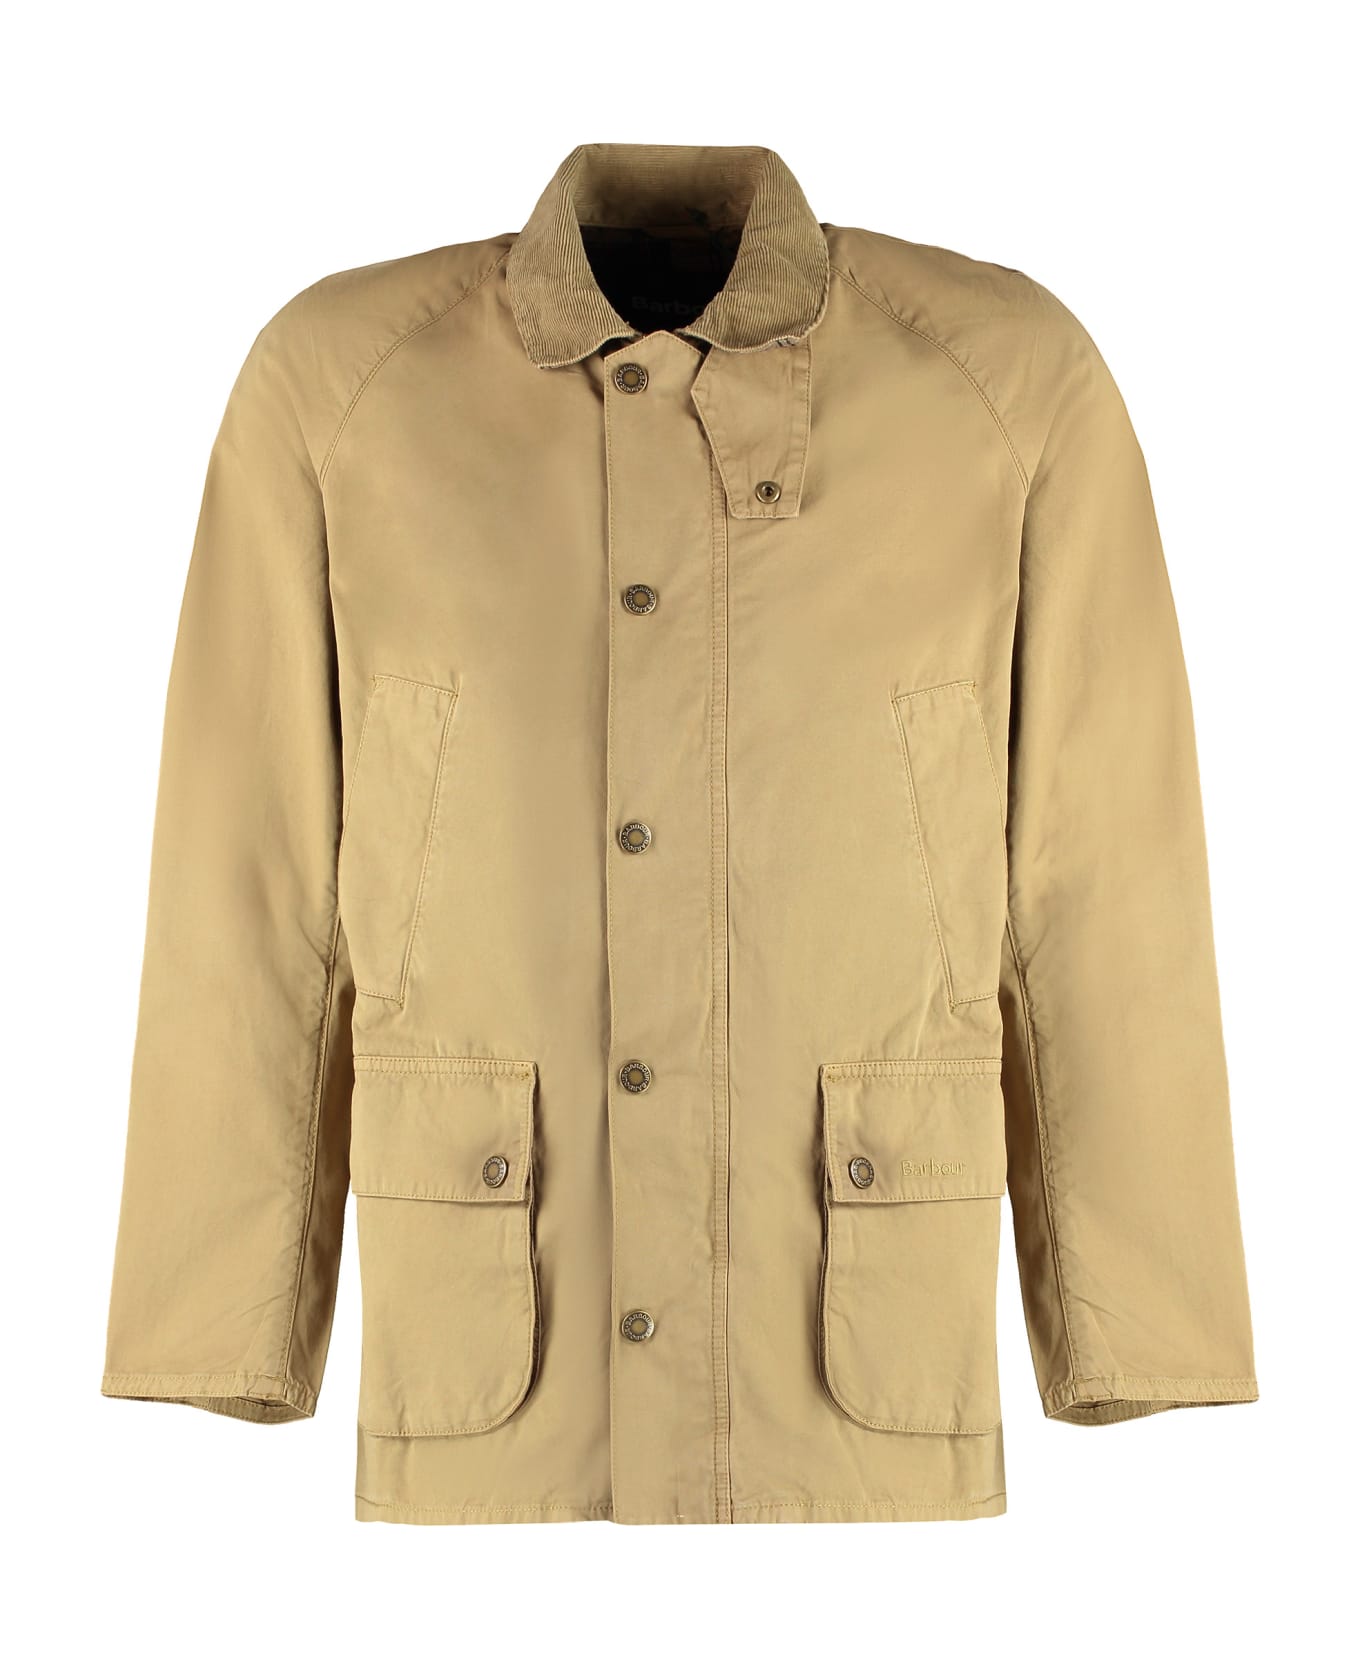 Barbour Ashby Casual Cotton Jacket - Beige